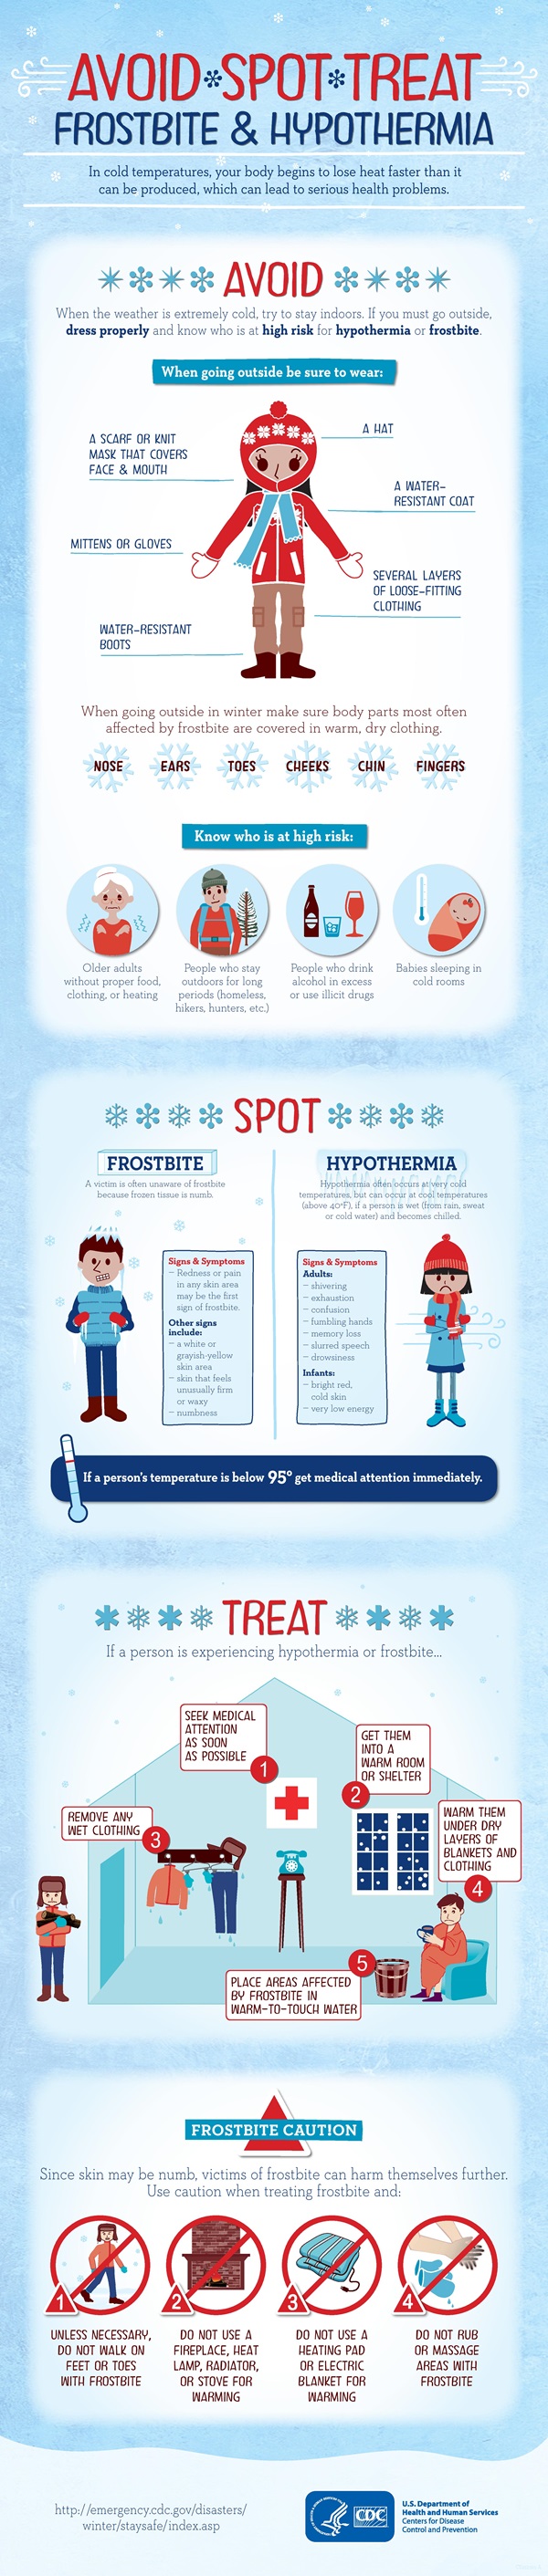 Avoid. Spot. Treat. Frostbite and Hypothermia